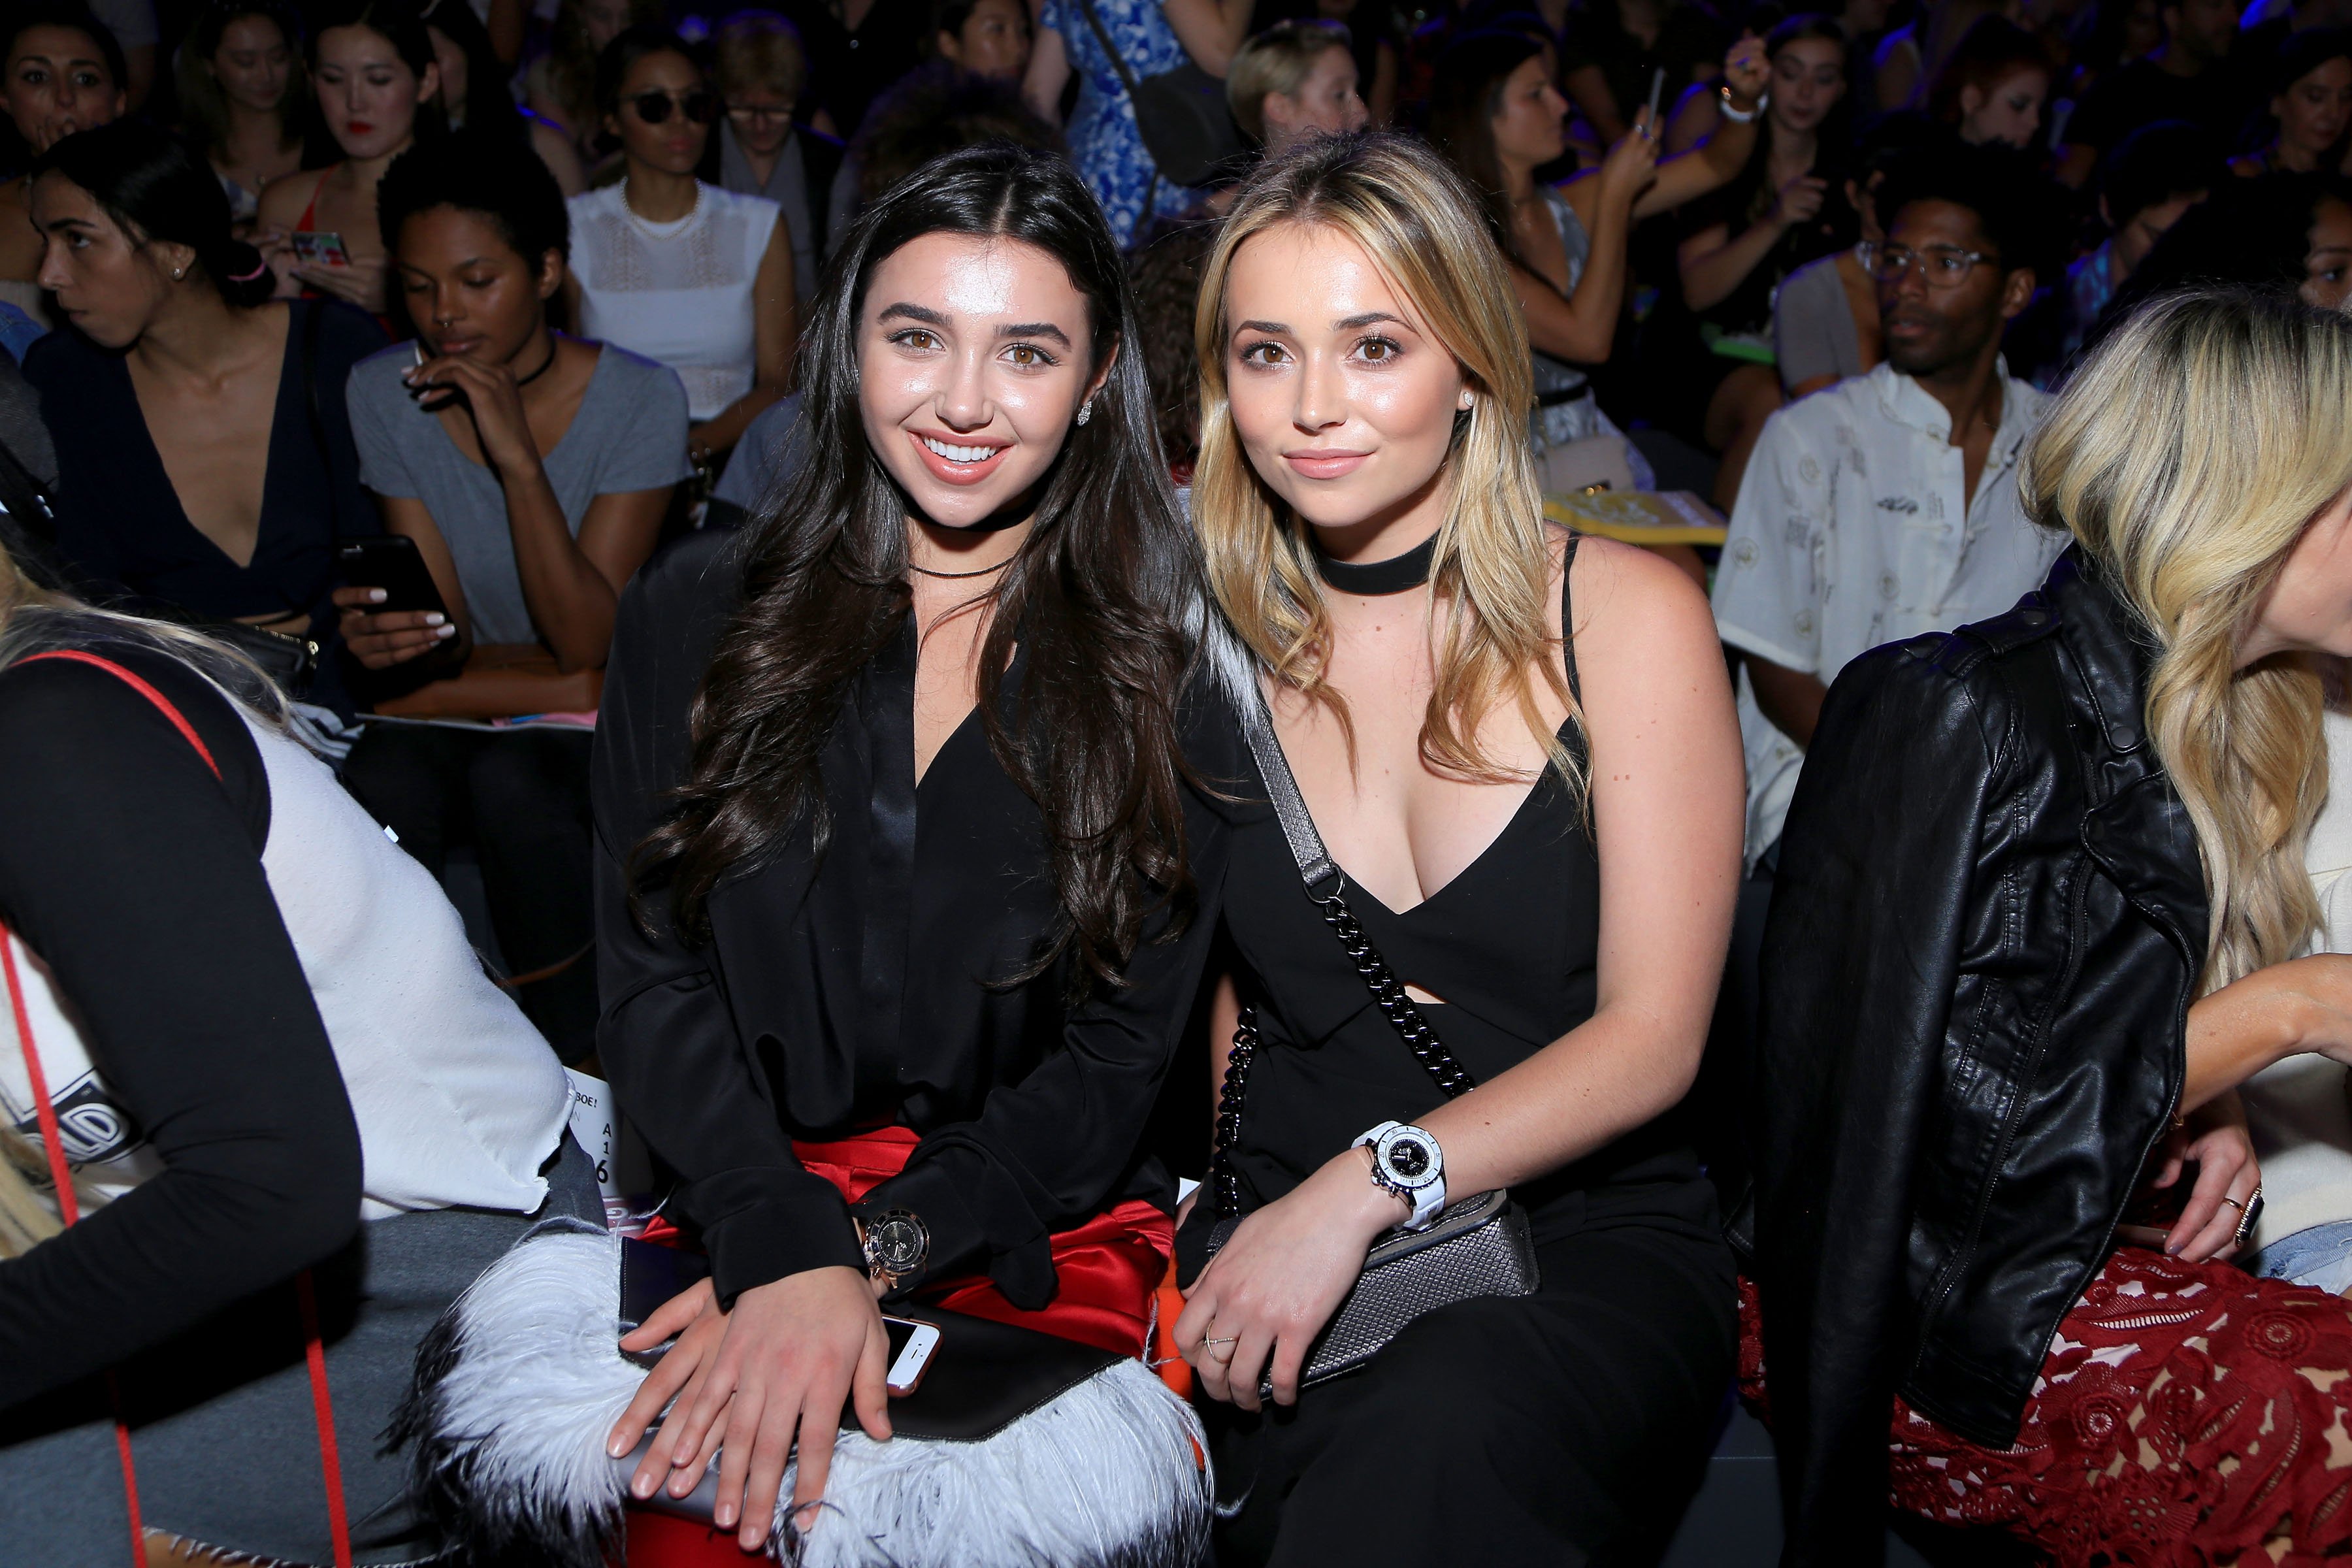 'The Bold and the Beautiful' star Camelia Somers (R) poses with her sister Violet Somers during a fashion show.